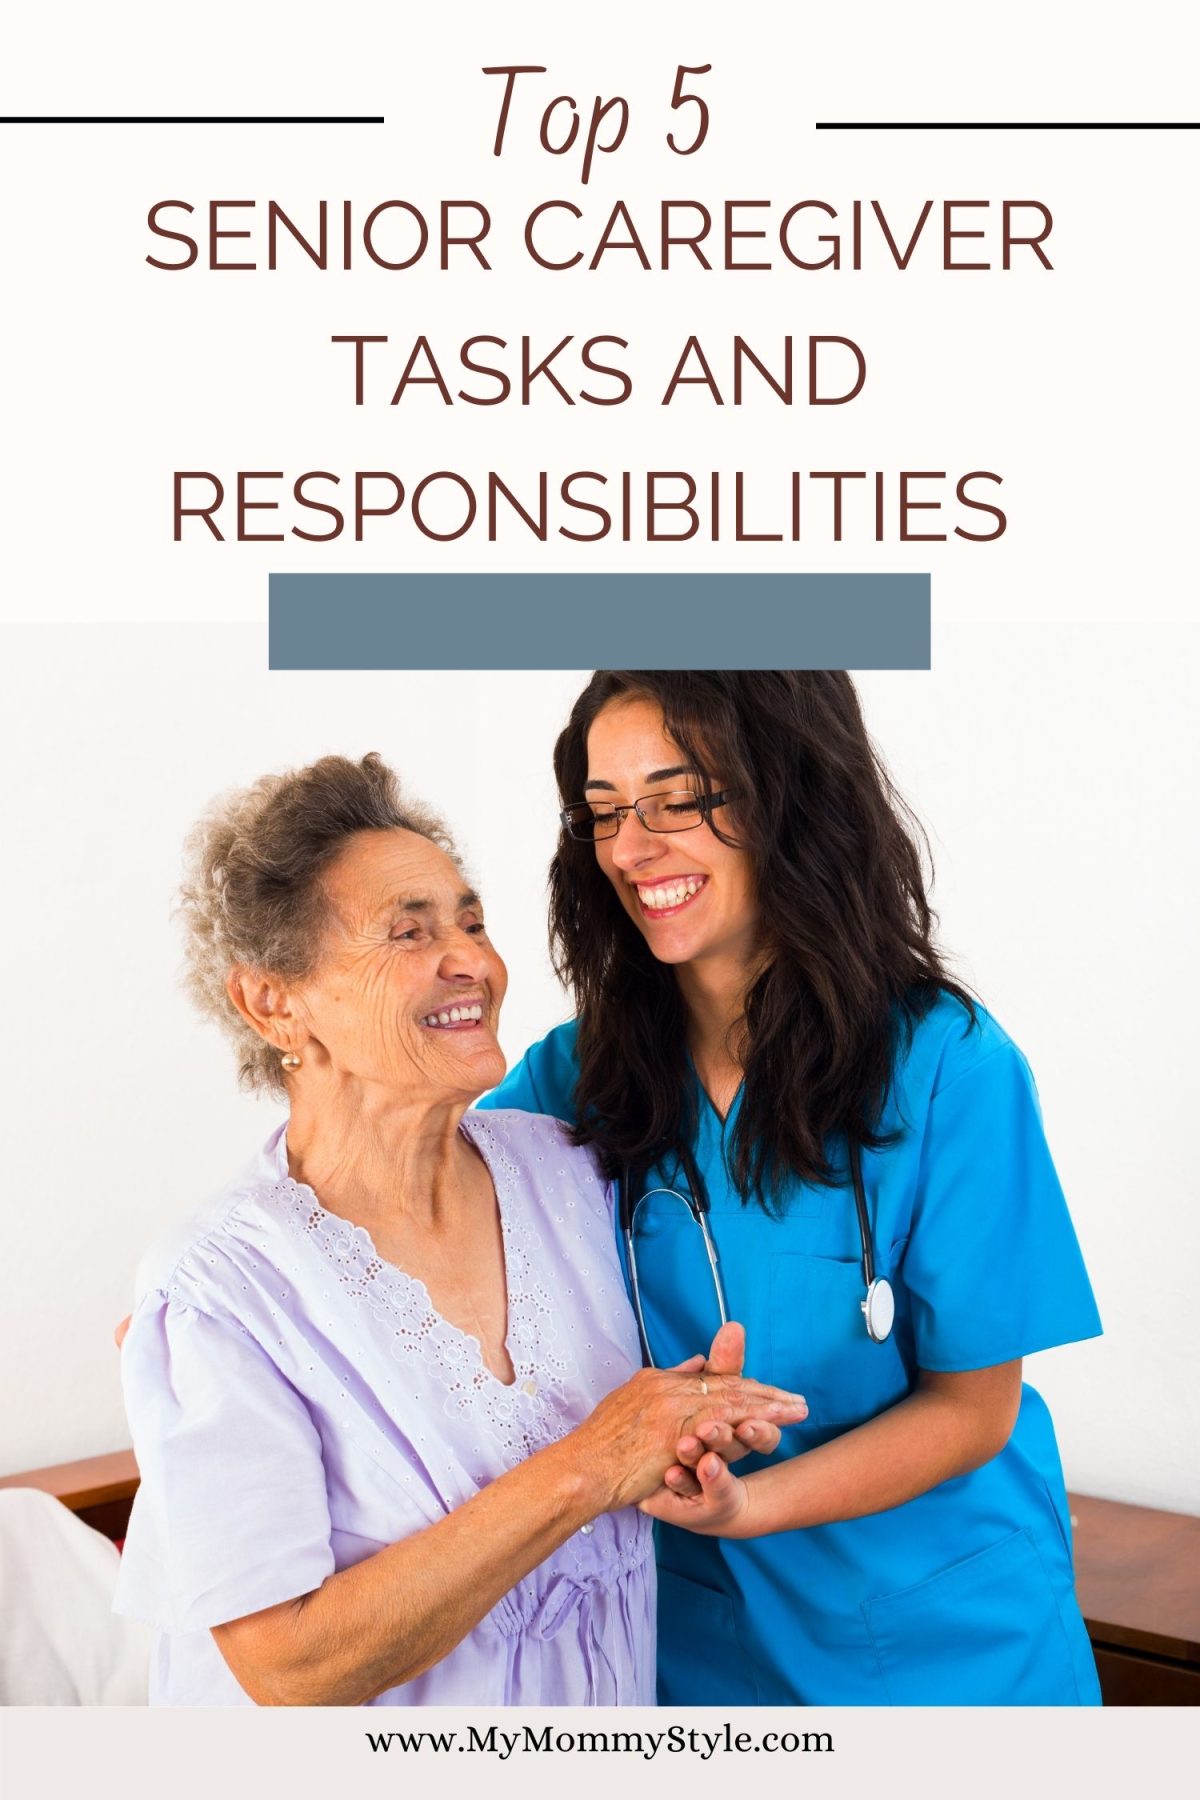 Top 5 Senior Caregiver Tasks and Responsibilities via @mymommystyle